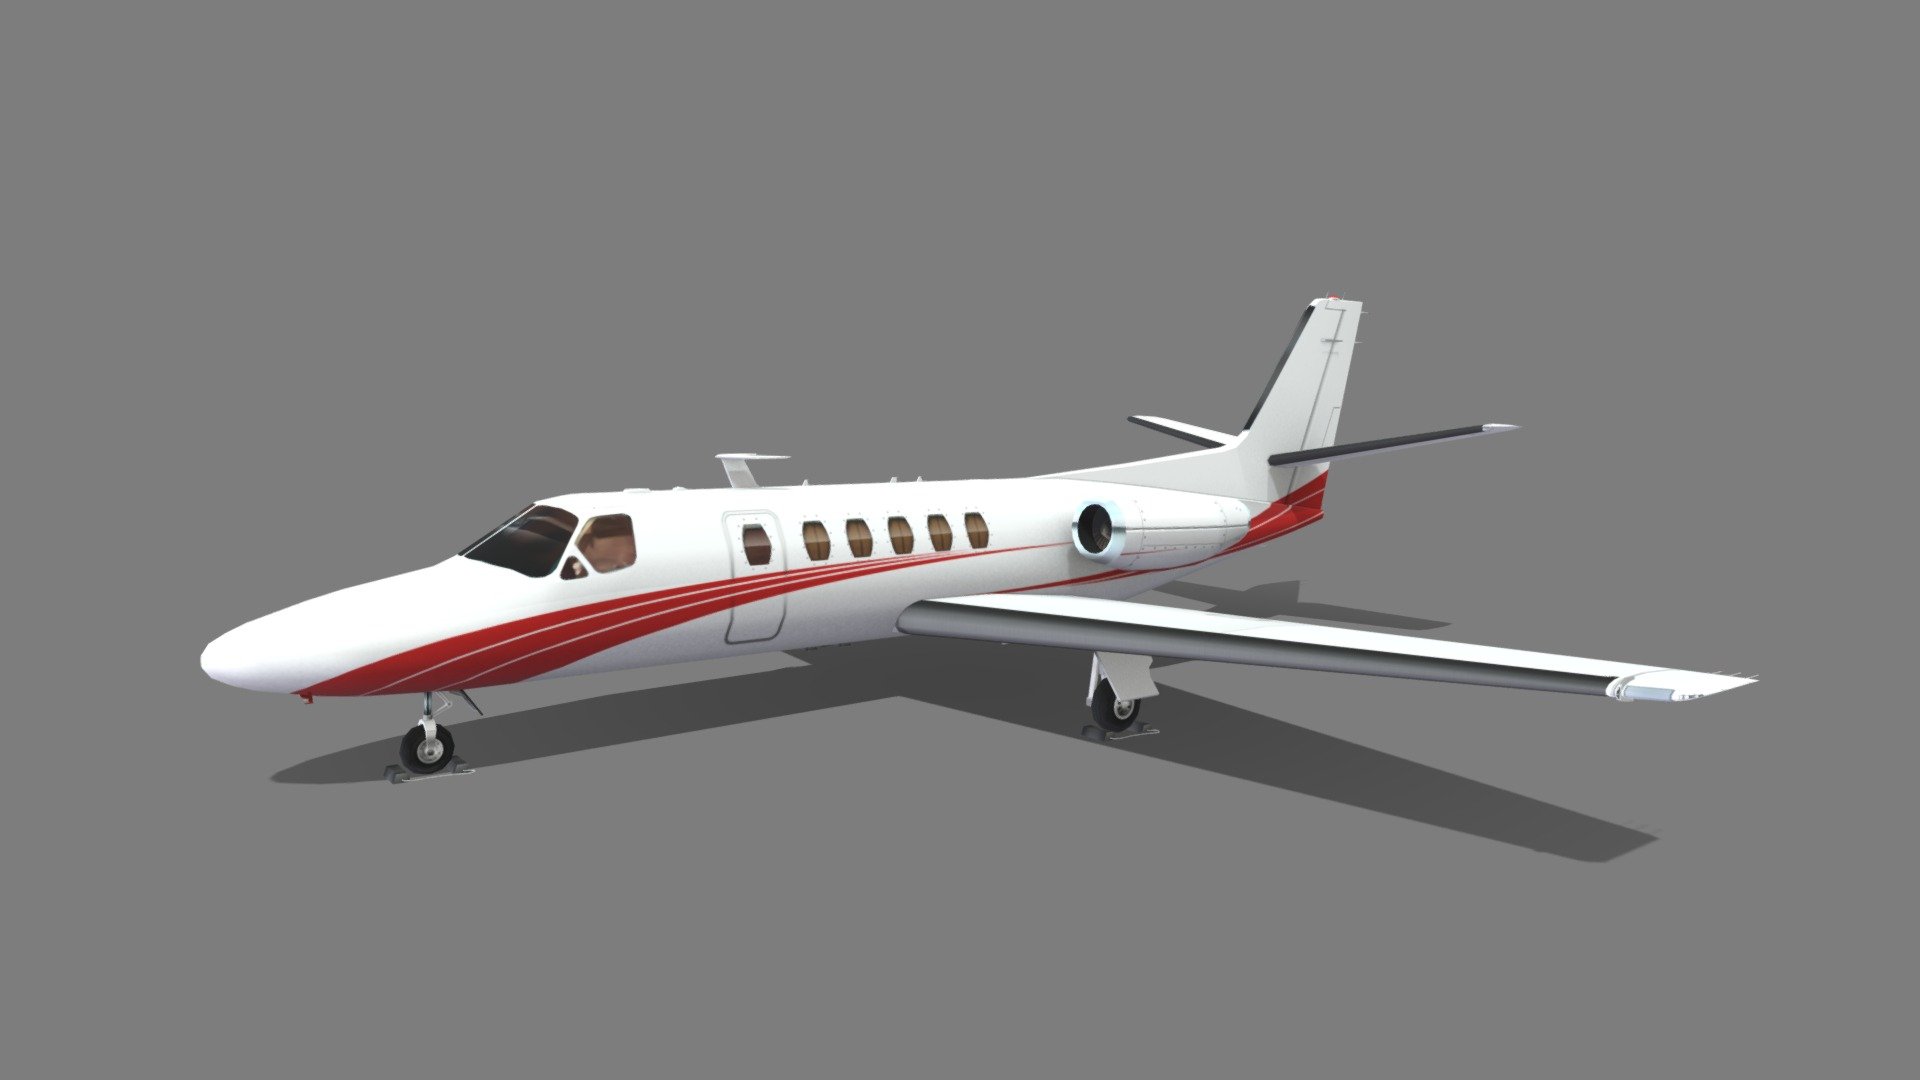 The Cessna Citation II are light corporate jets built by Cessna as part of the Citation family. Stretched from the Citation I, the Model 550 was announced in September 1976, first flew on January 31, 1977, and was certified in March 1978. The II/SP is a single pilot version, the improved S/II first flew on February 14, 1984 and the Citation Bravo, a stretched S/II with new avionics and more powerful P&amp;WC PW530A turbofans, first flew on April 25, 1995. The United States Navy adopted a version of the S/II as the T-47A. Production ceased in 2006 after 1,184 of all variants were delivered.

this is a static, non rigged, non animated, Lowpoly mesh, 2048x2048 psd template layered texture, for MSFS or XPlane Scenery Airport development , standard materials, enough detailed just to be seen as part of an scene without consuming GPU resources

thanks for looking! dont forget to check my other models - Cessna CITATION C550 Static low poly - Buy Royalty Free 3D model by Hangarcerouno 3d model